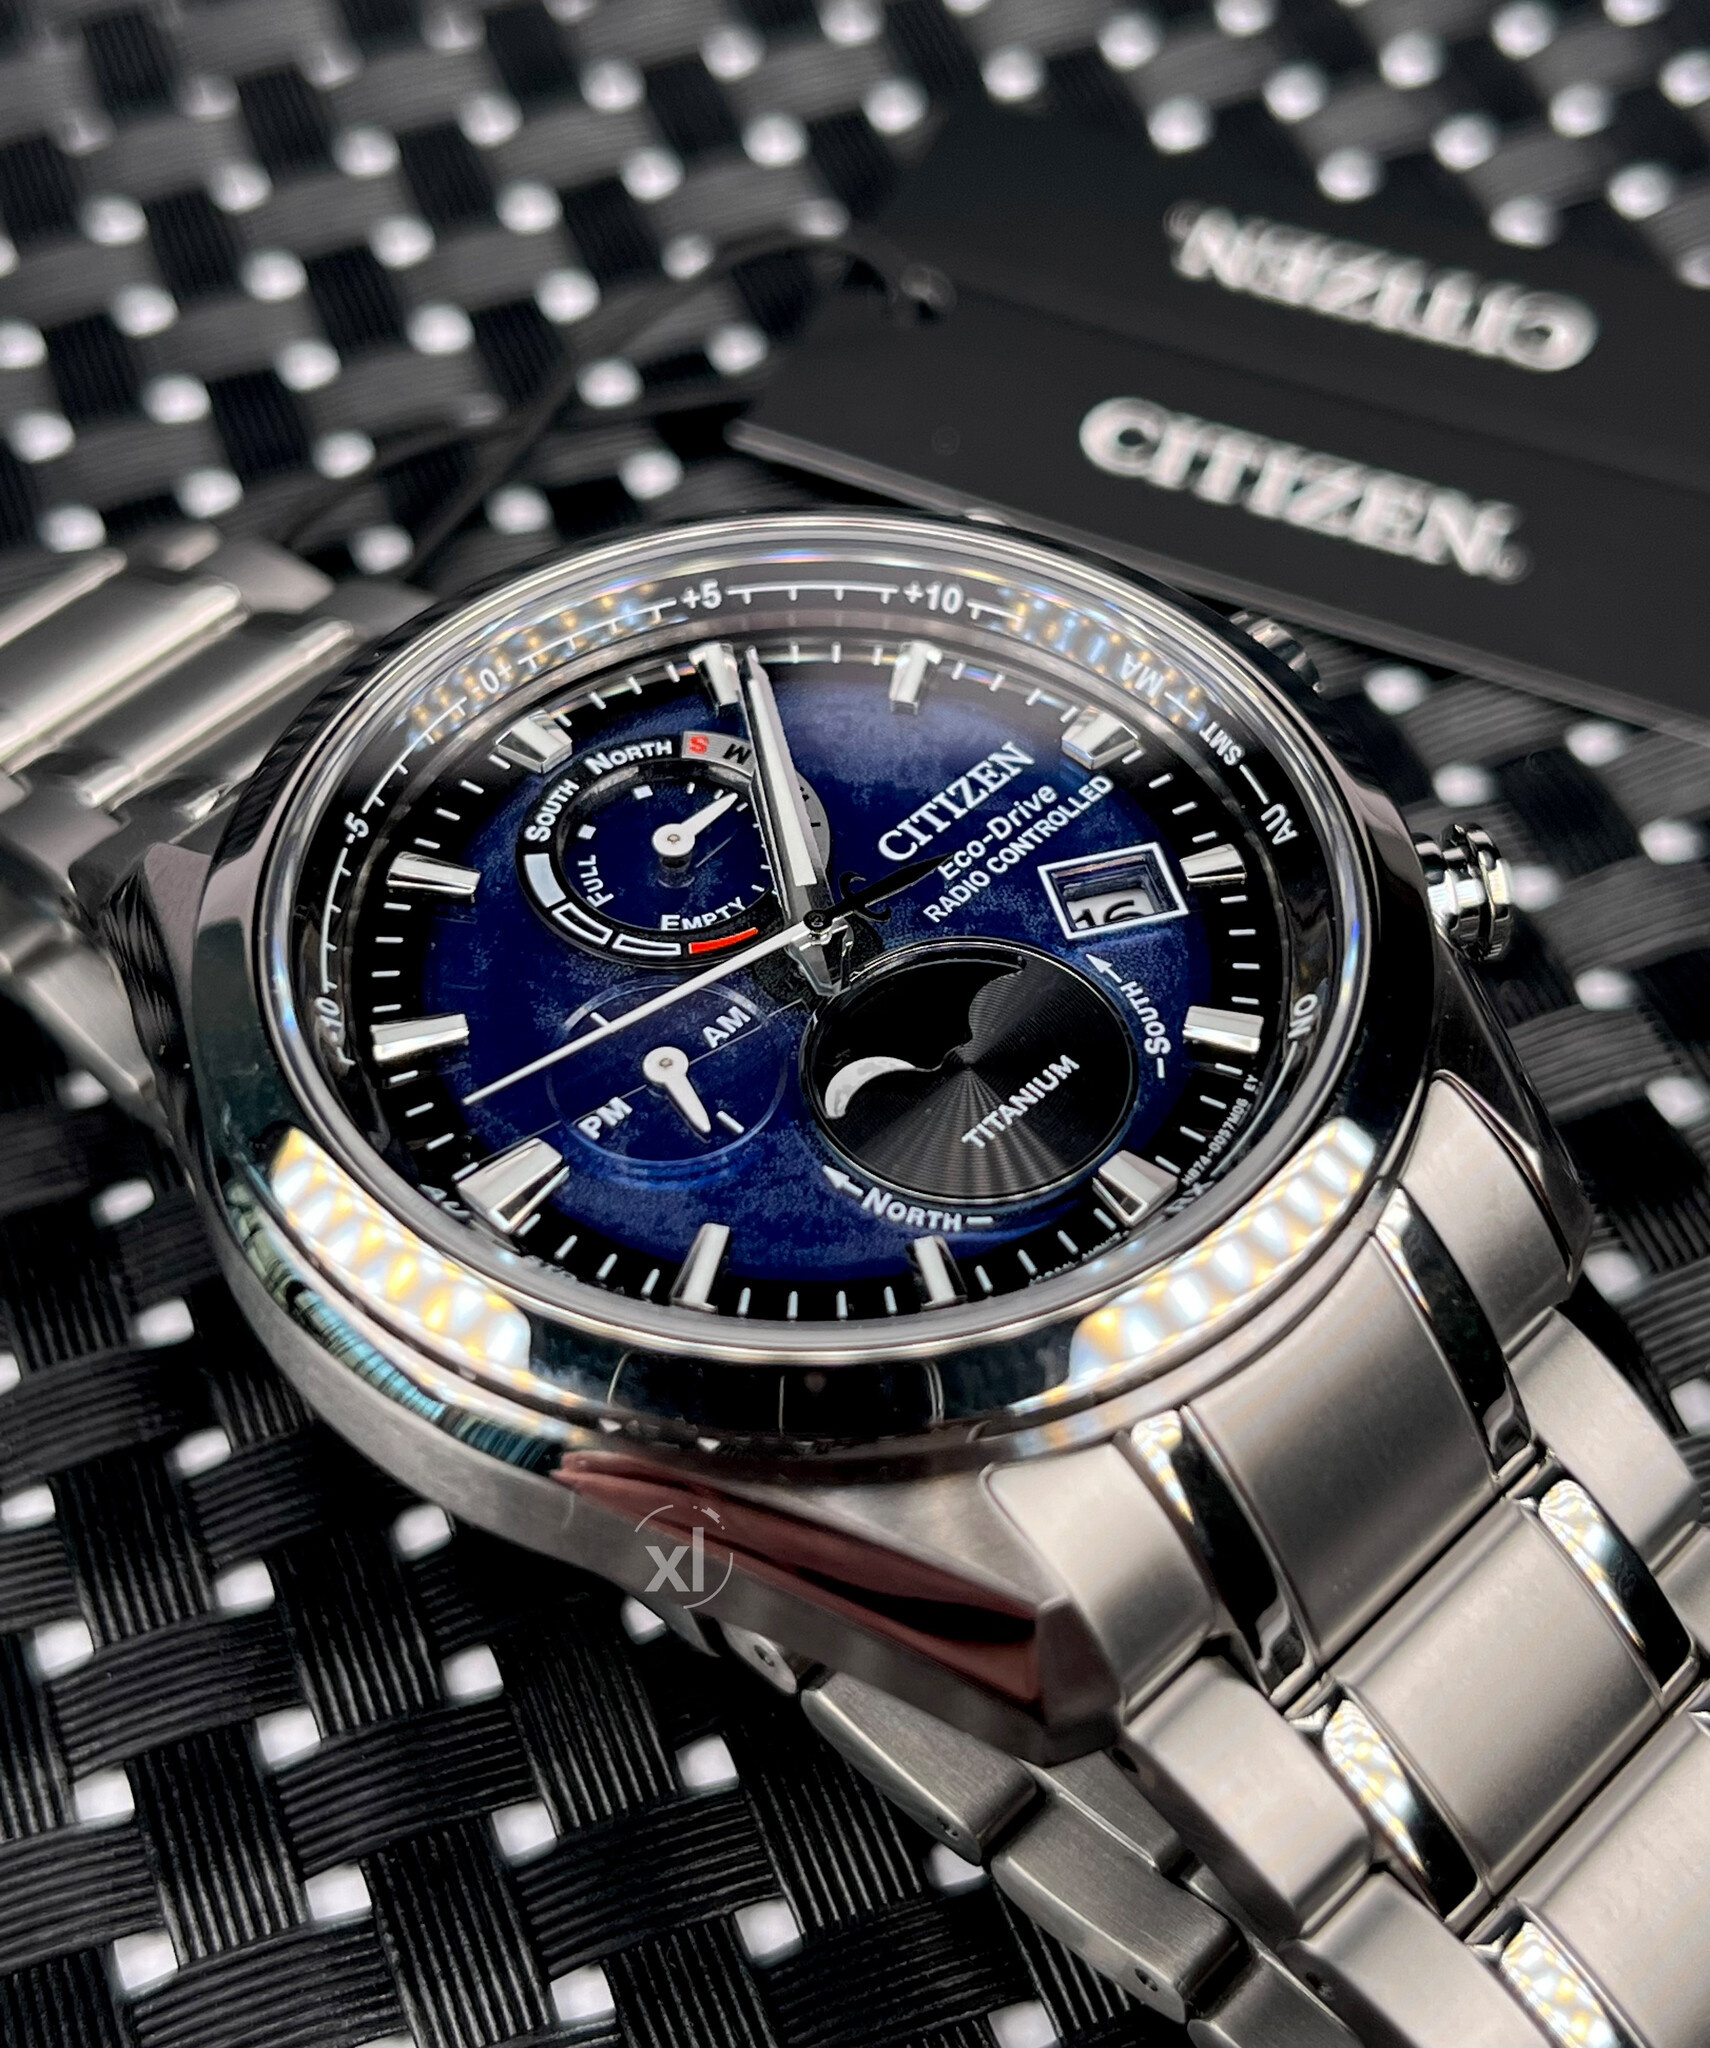 Citizen watch with Sapphire crystal